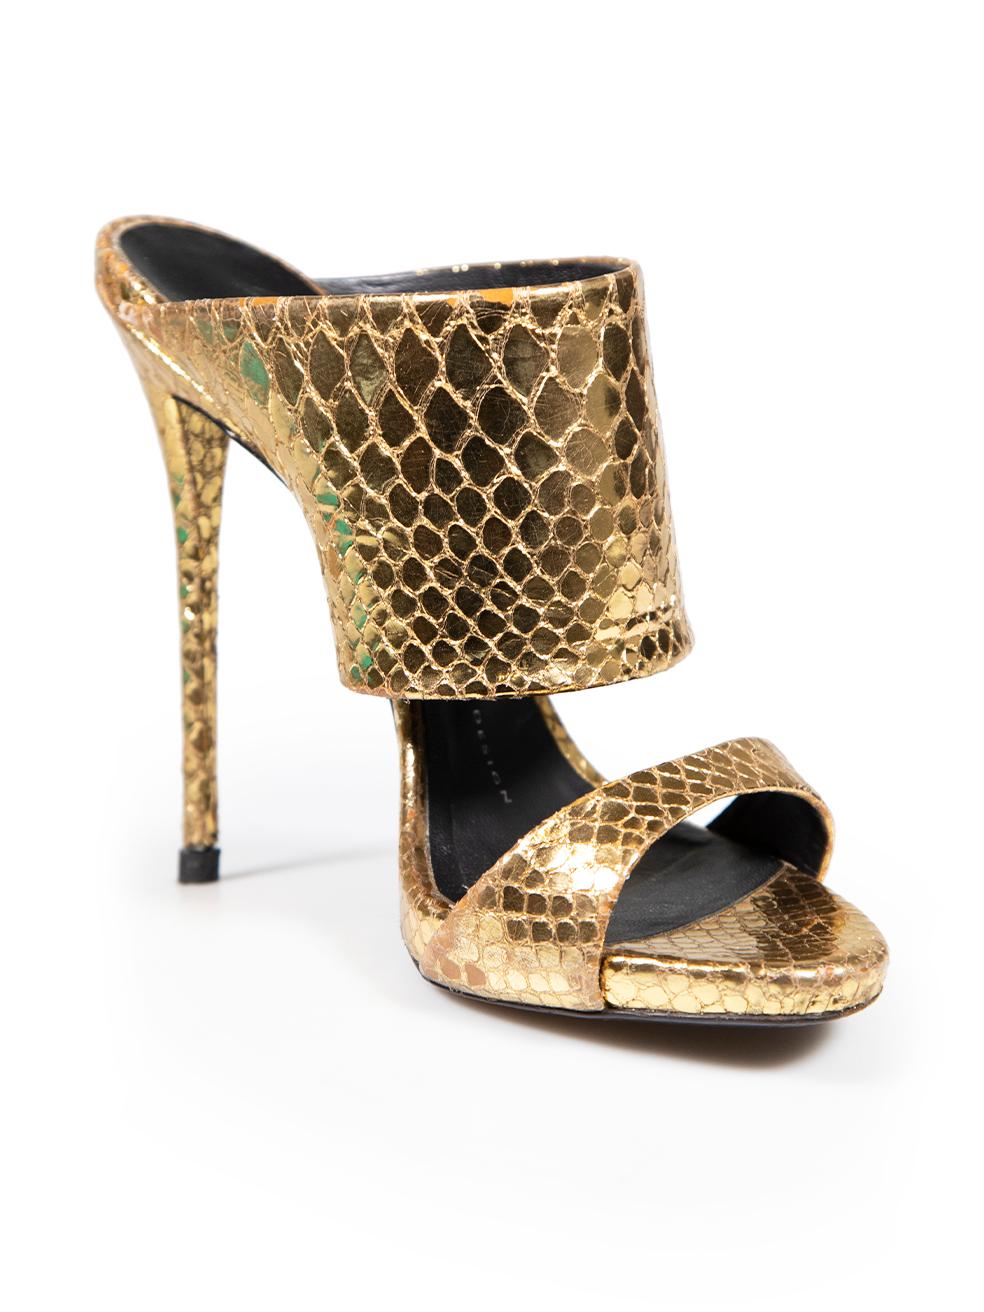 CONDITION is Good. General wear to shoes is evident. Moderate signs of wear to both shoe heels, toes and both sides with peeling of the snakeskin scales on this used Giuseppe Zanotti designer resale item.
 
 
 
 Details
 
 
 Gold metallic
 
